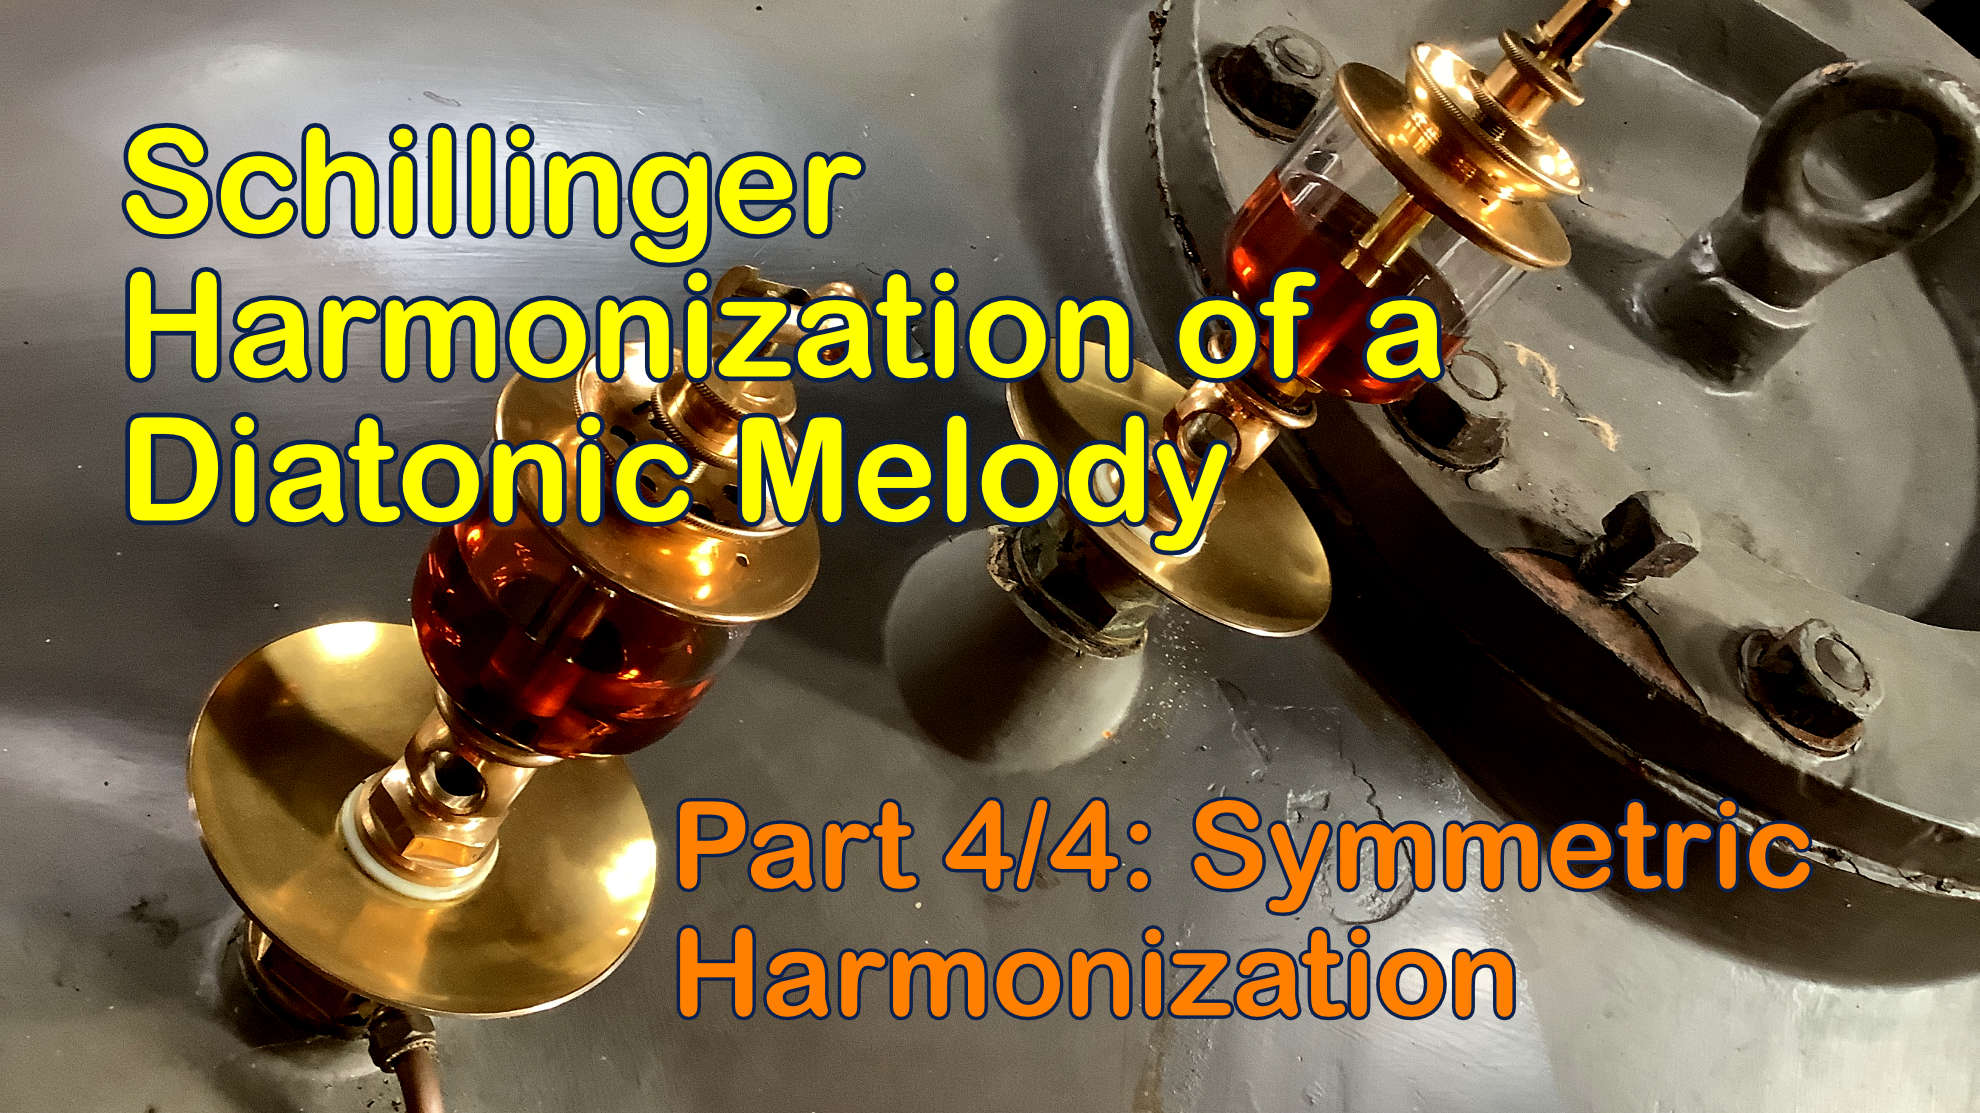 YouTube thumbnail for the Schillinger Harmonization of a Diatonic Melody Part 4 video tutorial